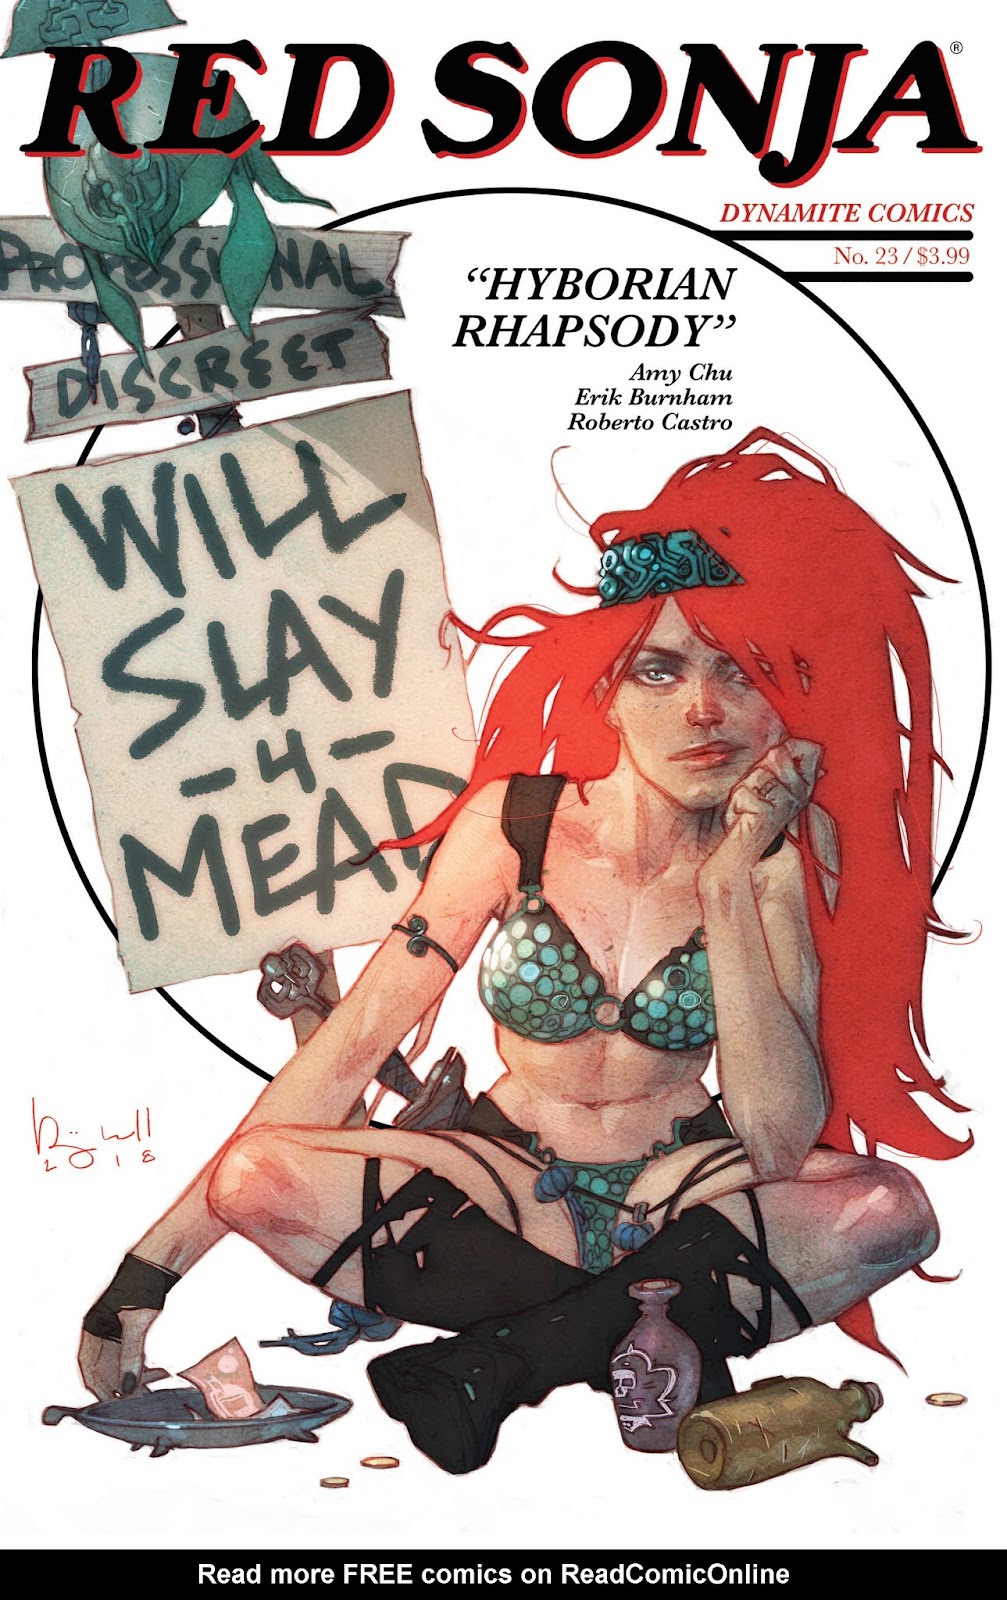 Red Sonja Vol. 4 issue 23 - Page 1